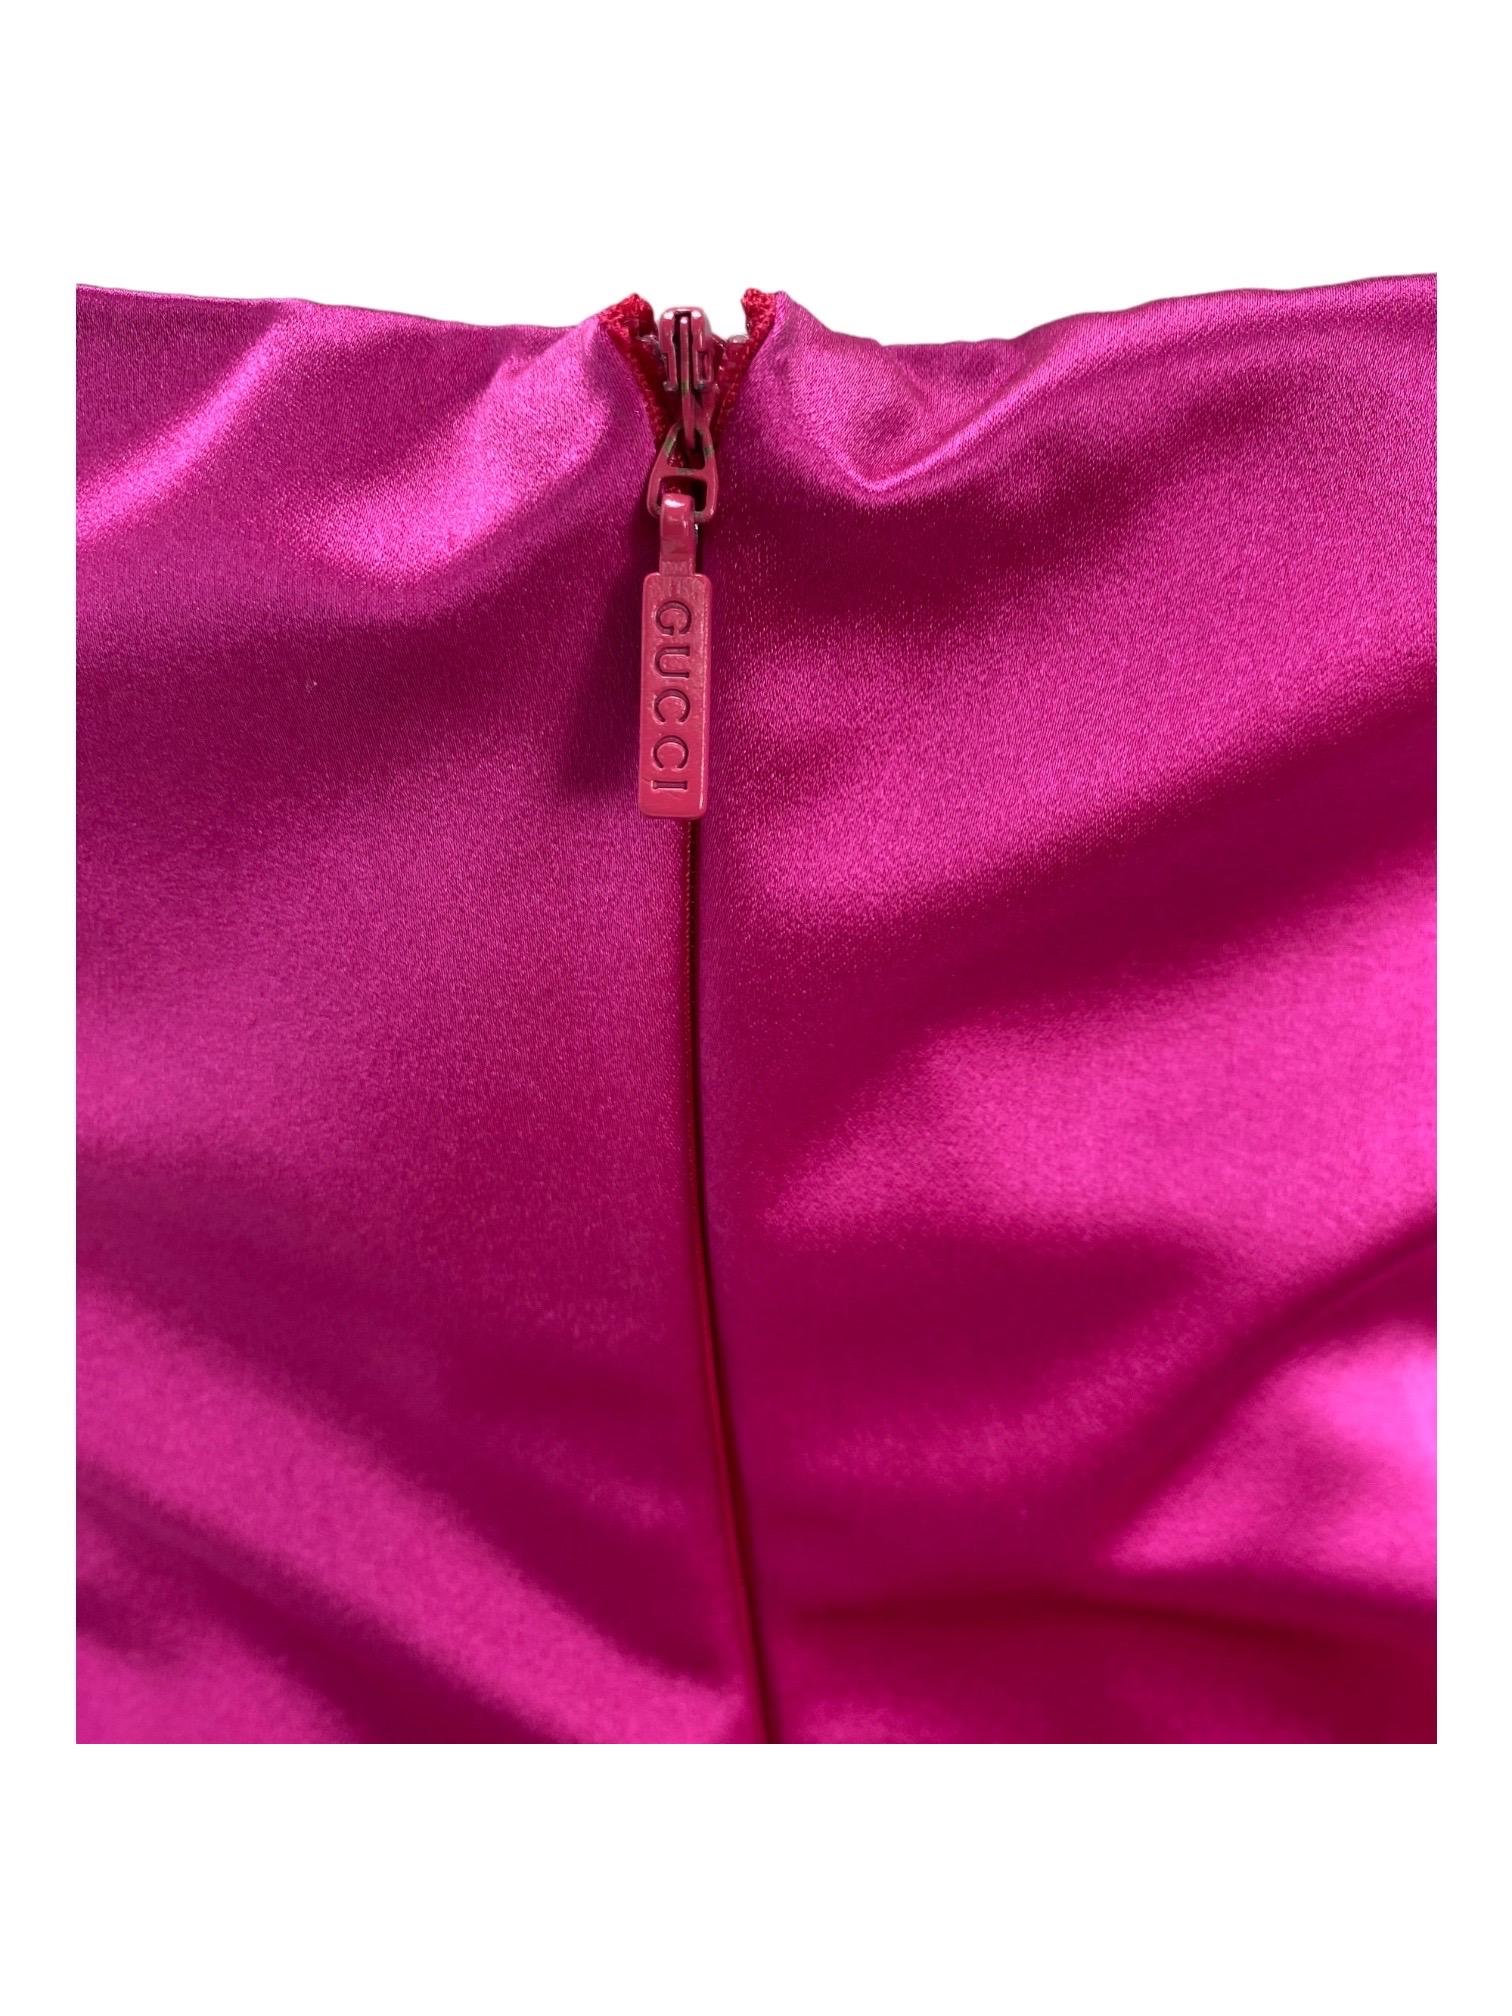 S/S 2001 Vintage Tom Ford for Gucci Hot Pink Strapless Dress For Sale 2